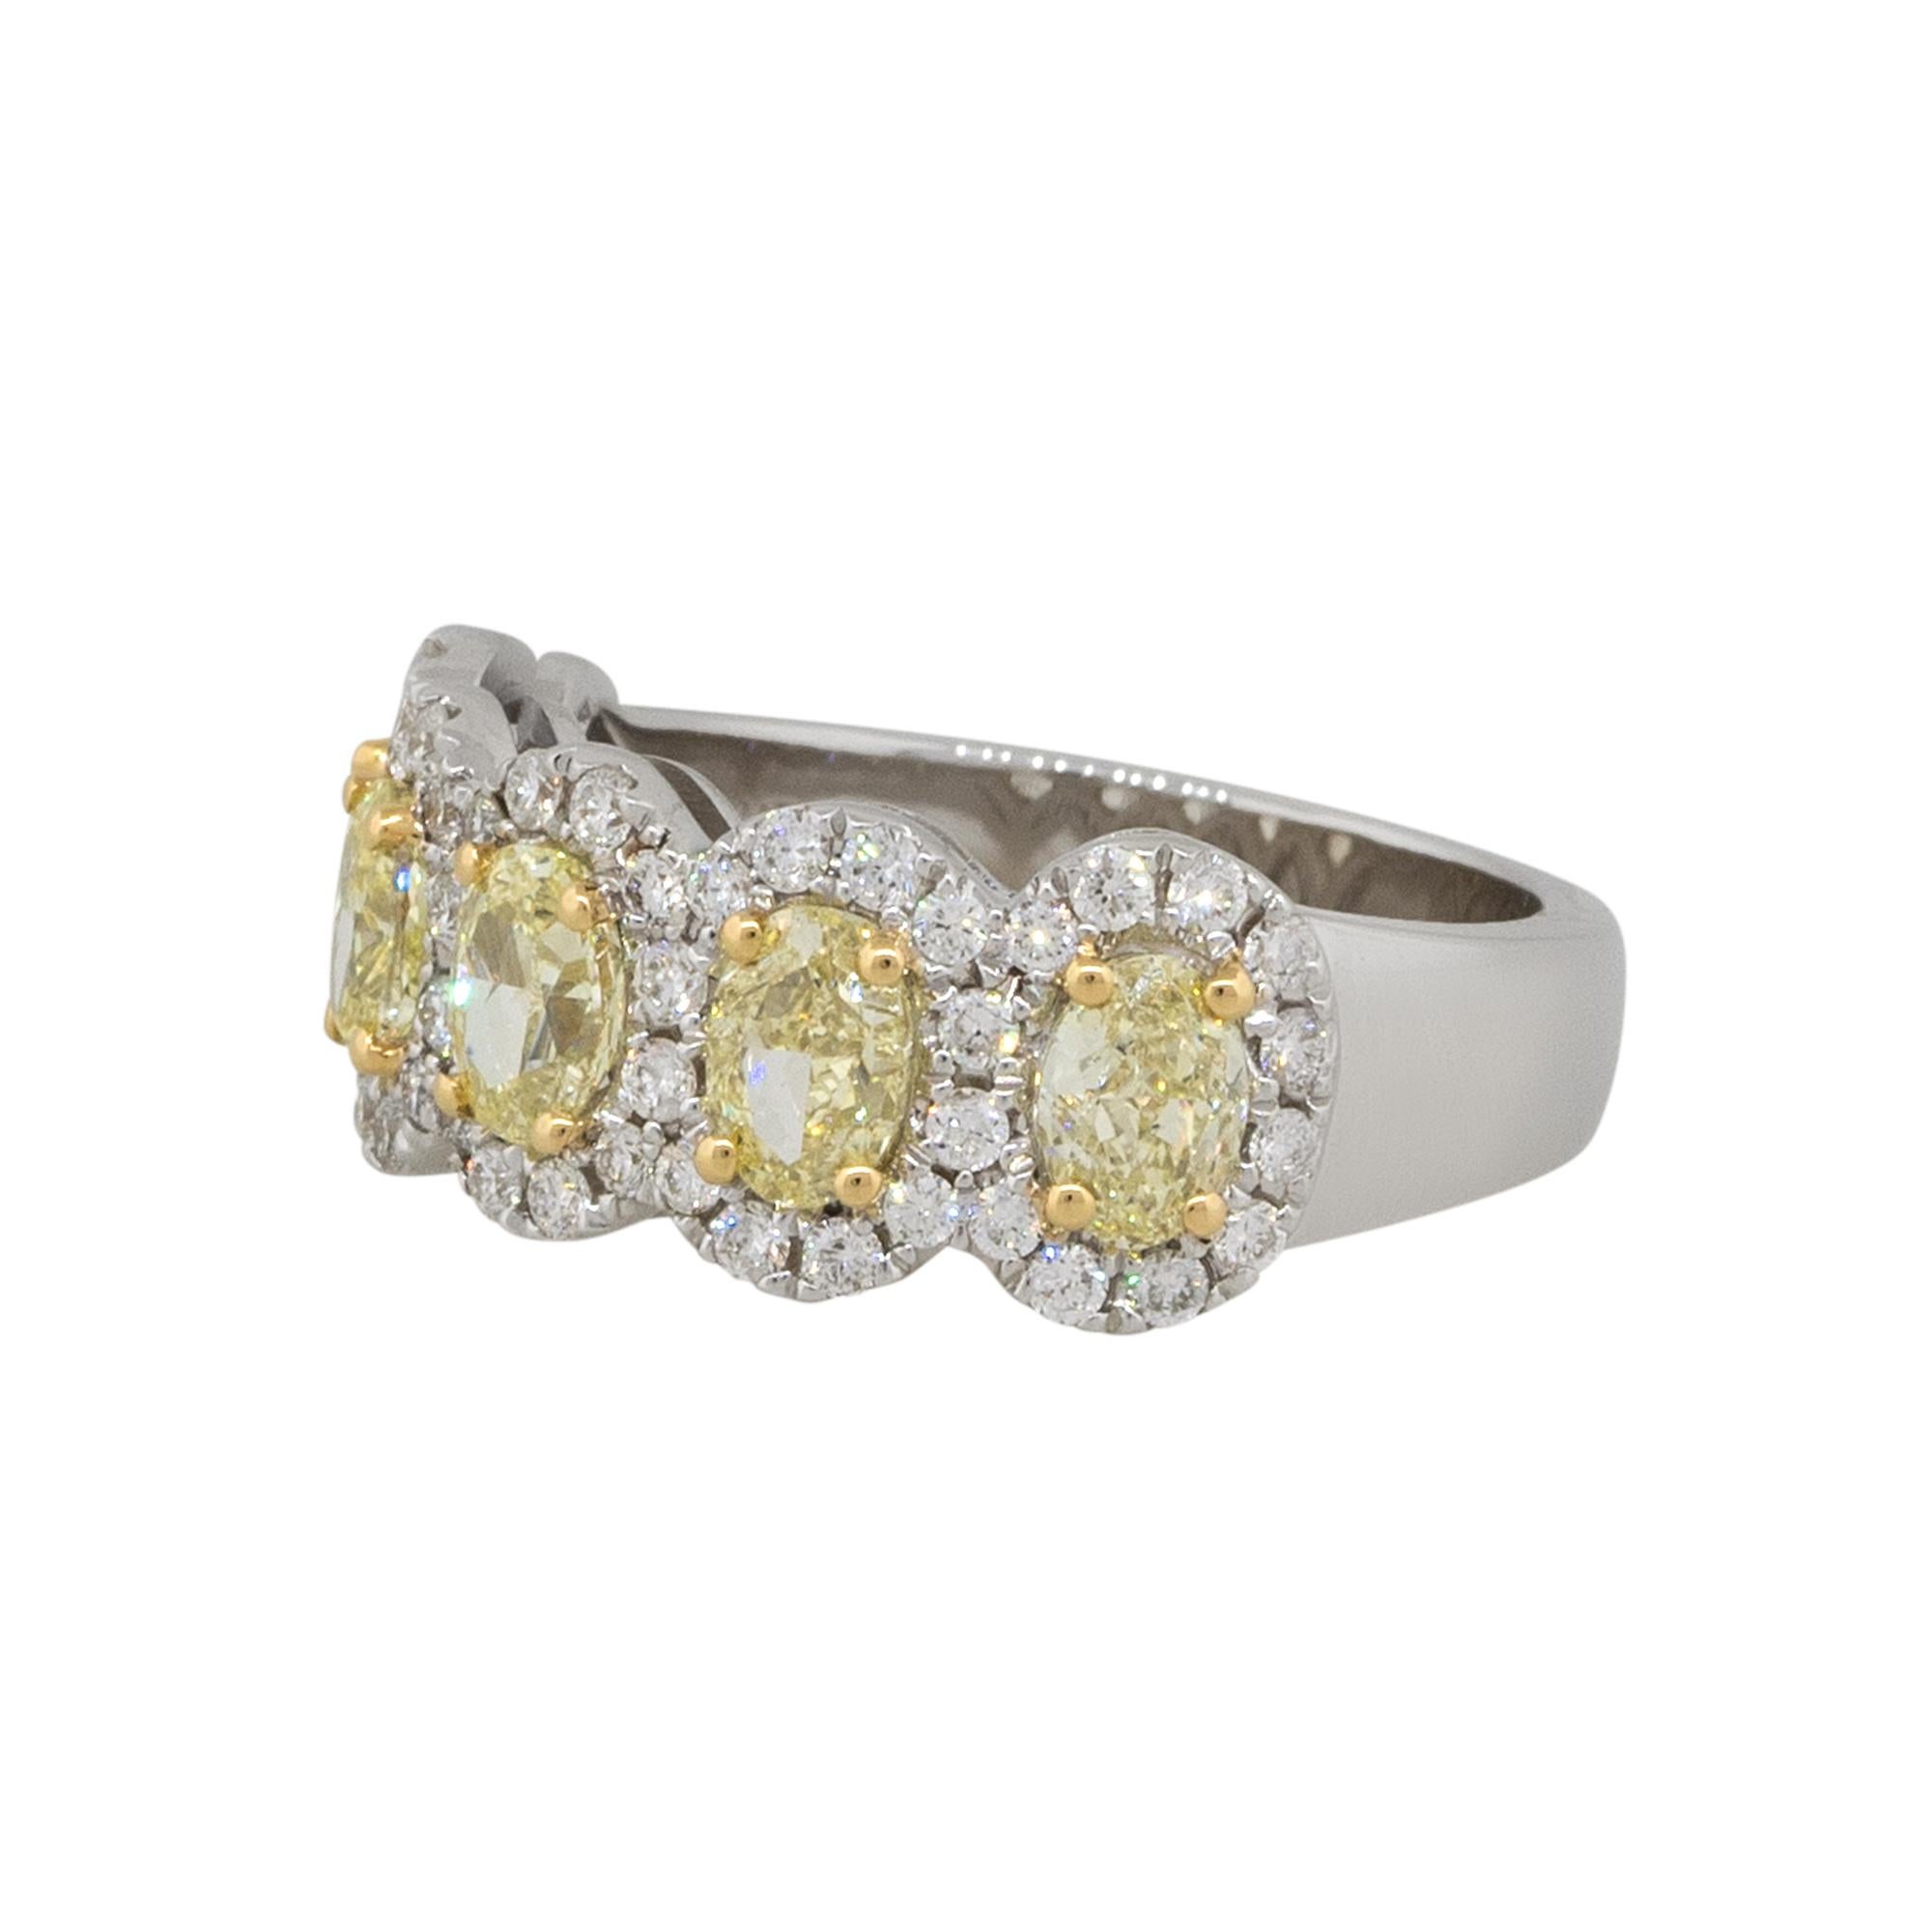 Material: 18k Yellow Gold
Diamond details: Approx. 1.85ctw of Oval cut Diamonds. Diamonds are Fancy Yellow in color and VS in clarity
                             Approx. 0.57ctw of round cut Diamonds. Diamonds are G/H in color and VS in